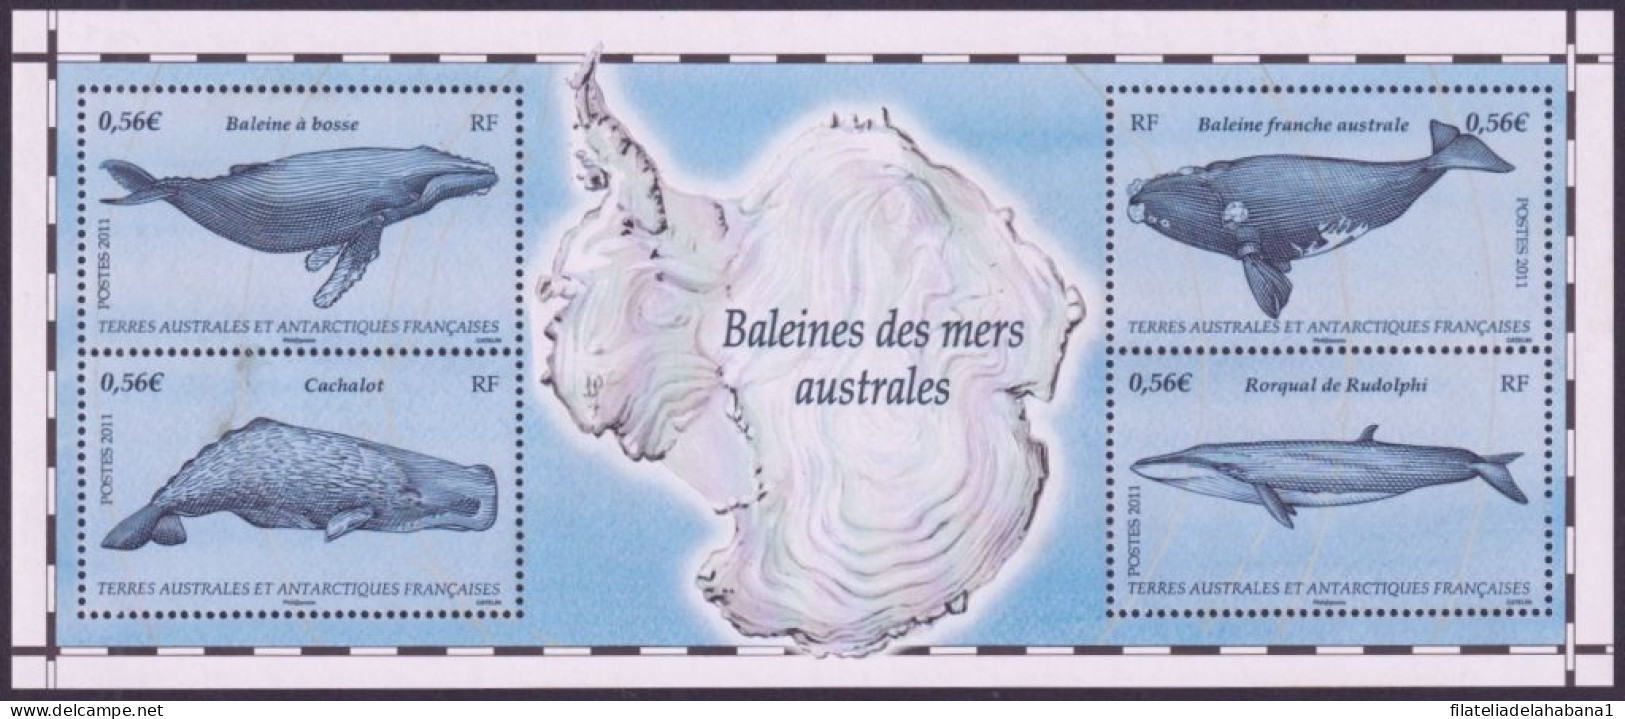 F-EX49834 TAAF FRANCE ANTARCTIC MNH 2011 MARINE WILDLIFE FISH WHALE OF SOUTHERN. - Wale